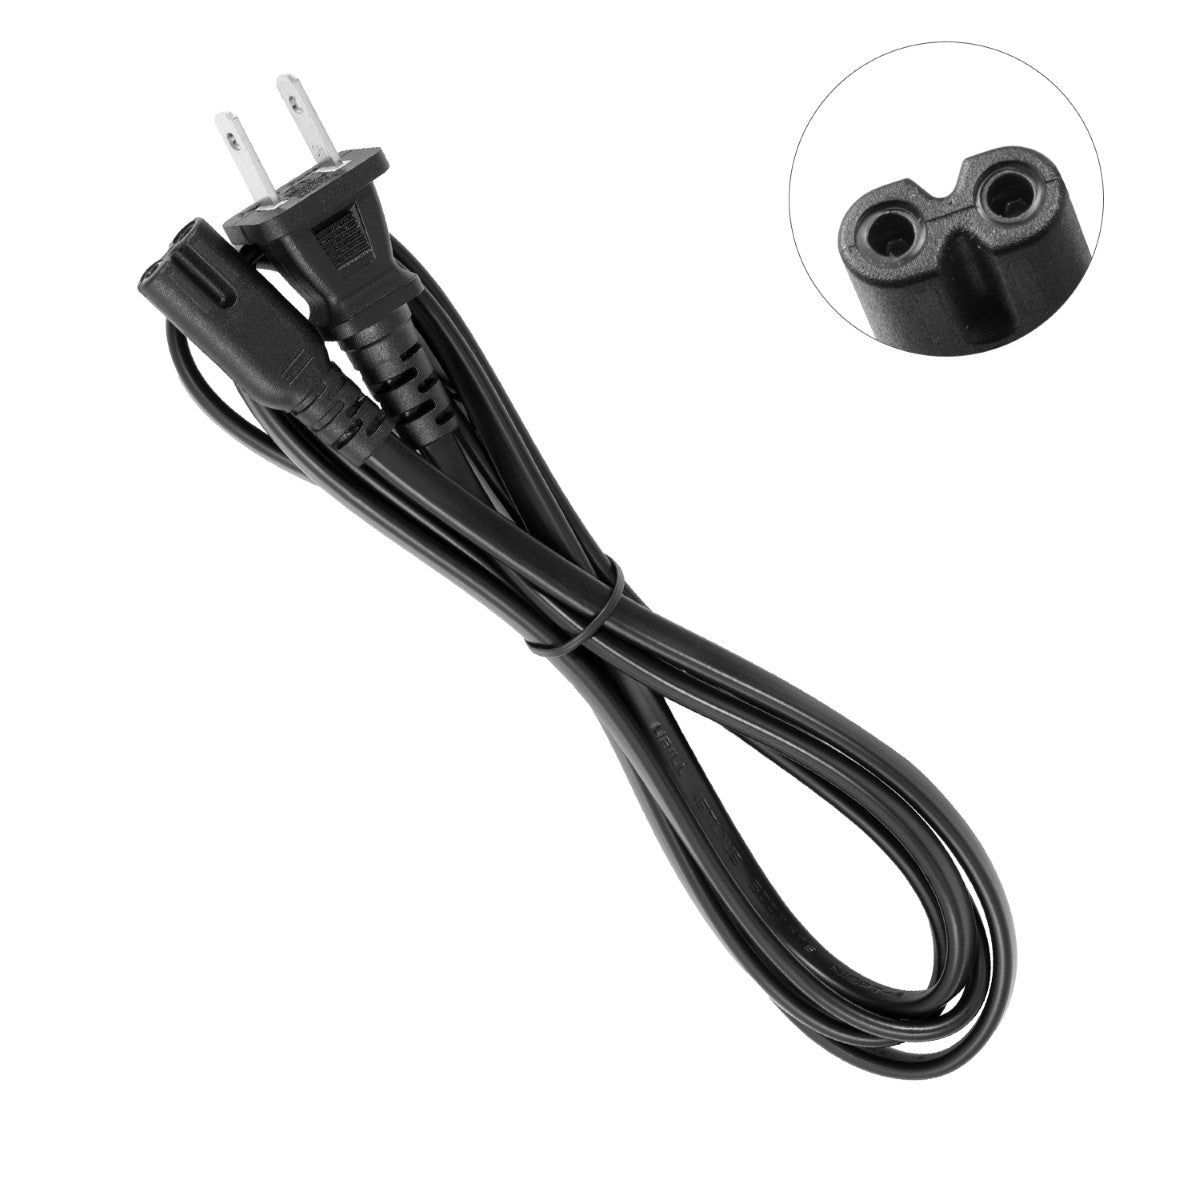 Power Cord for HP Officejet Pro X476dw Printer.